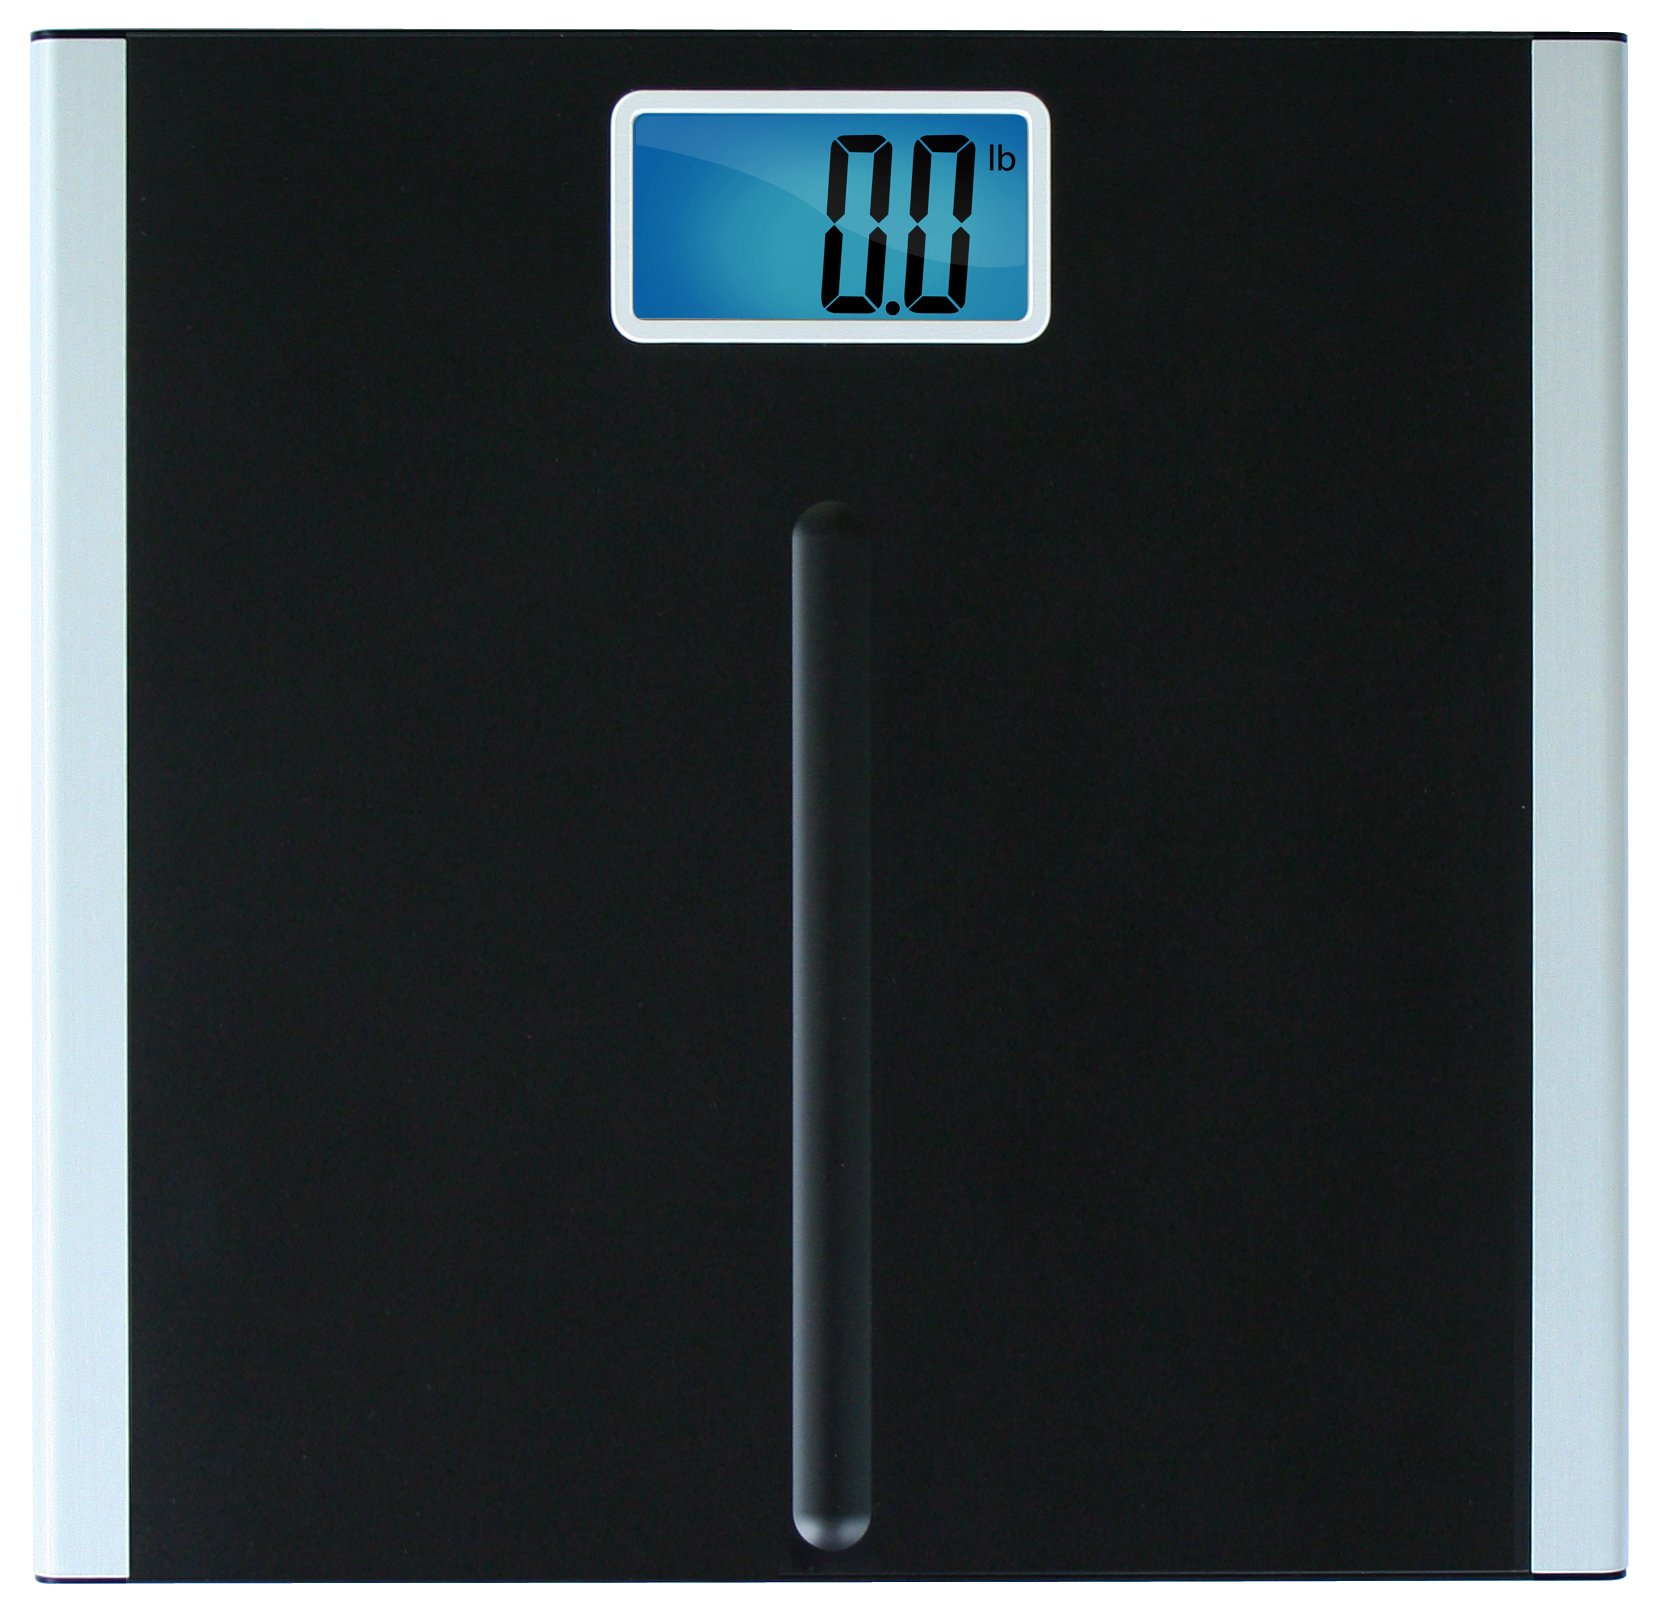 Eat Smart Precision Premium Digital Bathroom Scale with 3 5 inch Readout Display and _Step On_ Technology, Bath Scale for Body Weight, 400 lb Capacity, Black>